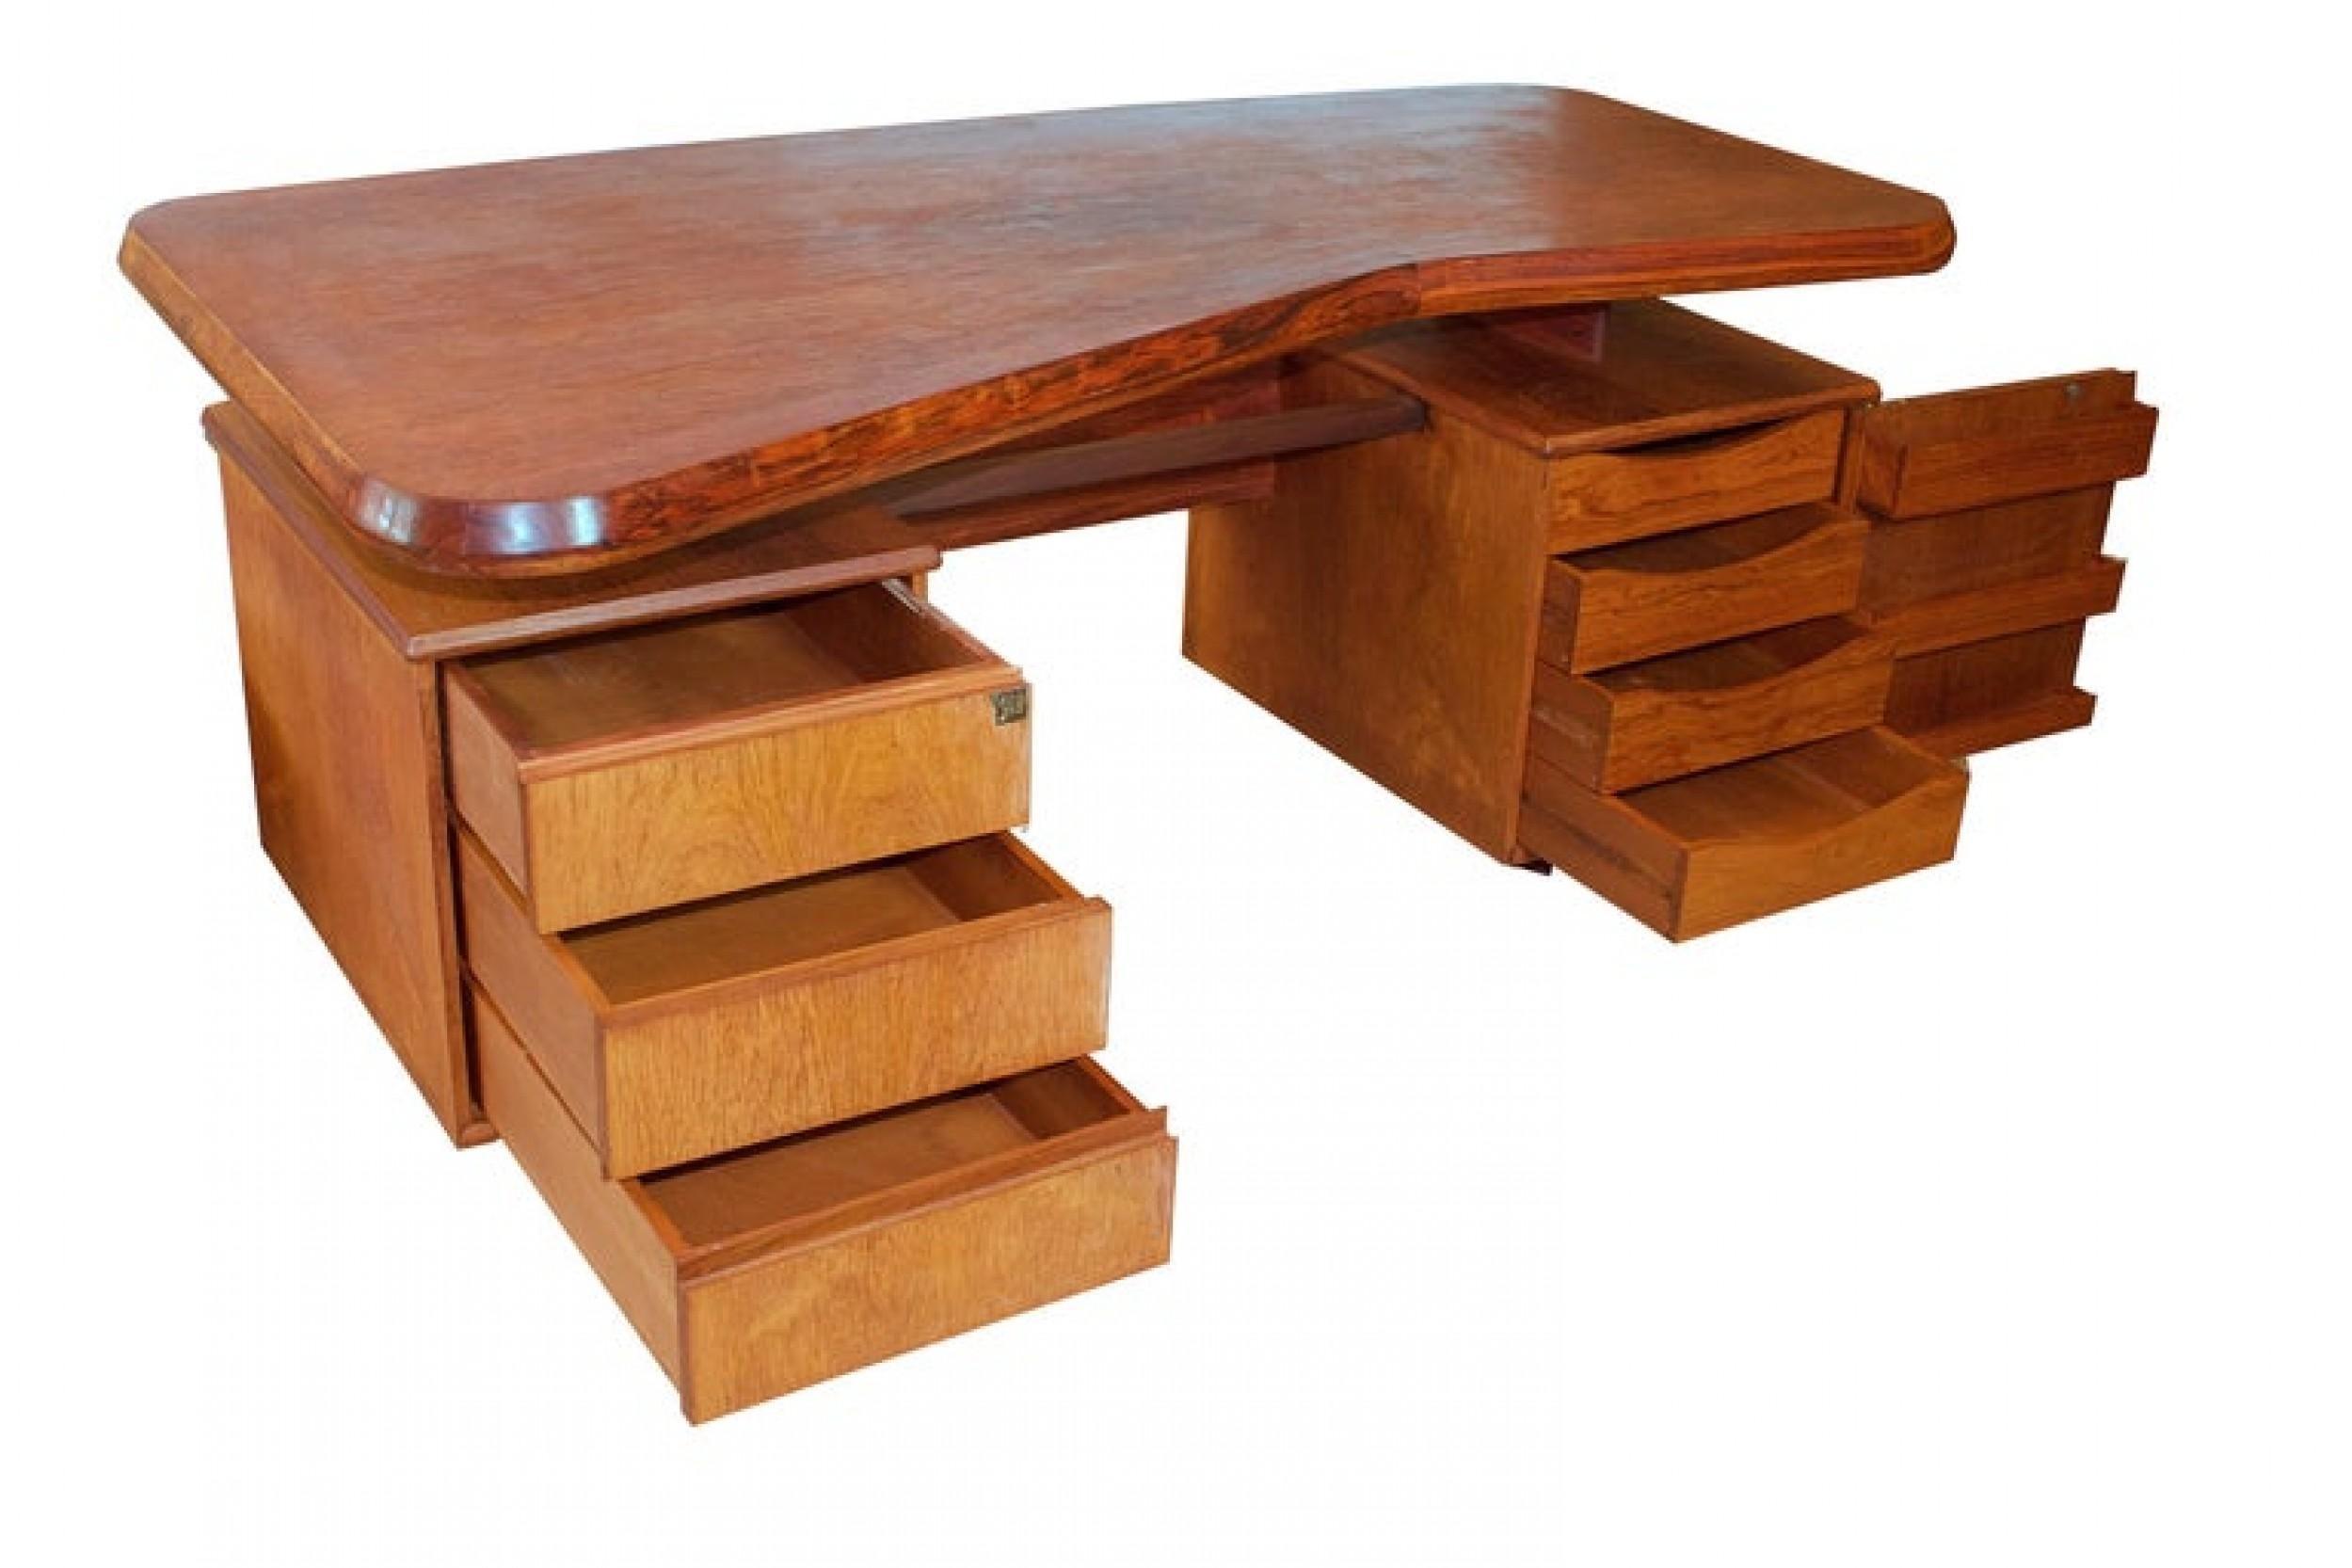 Unique French Modern Solid Rosewood Desk, Pierre Chapo, 1950s For Sale 3